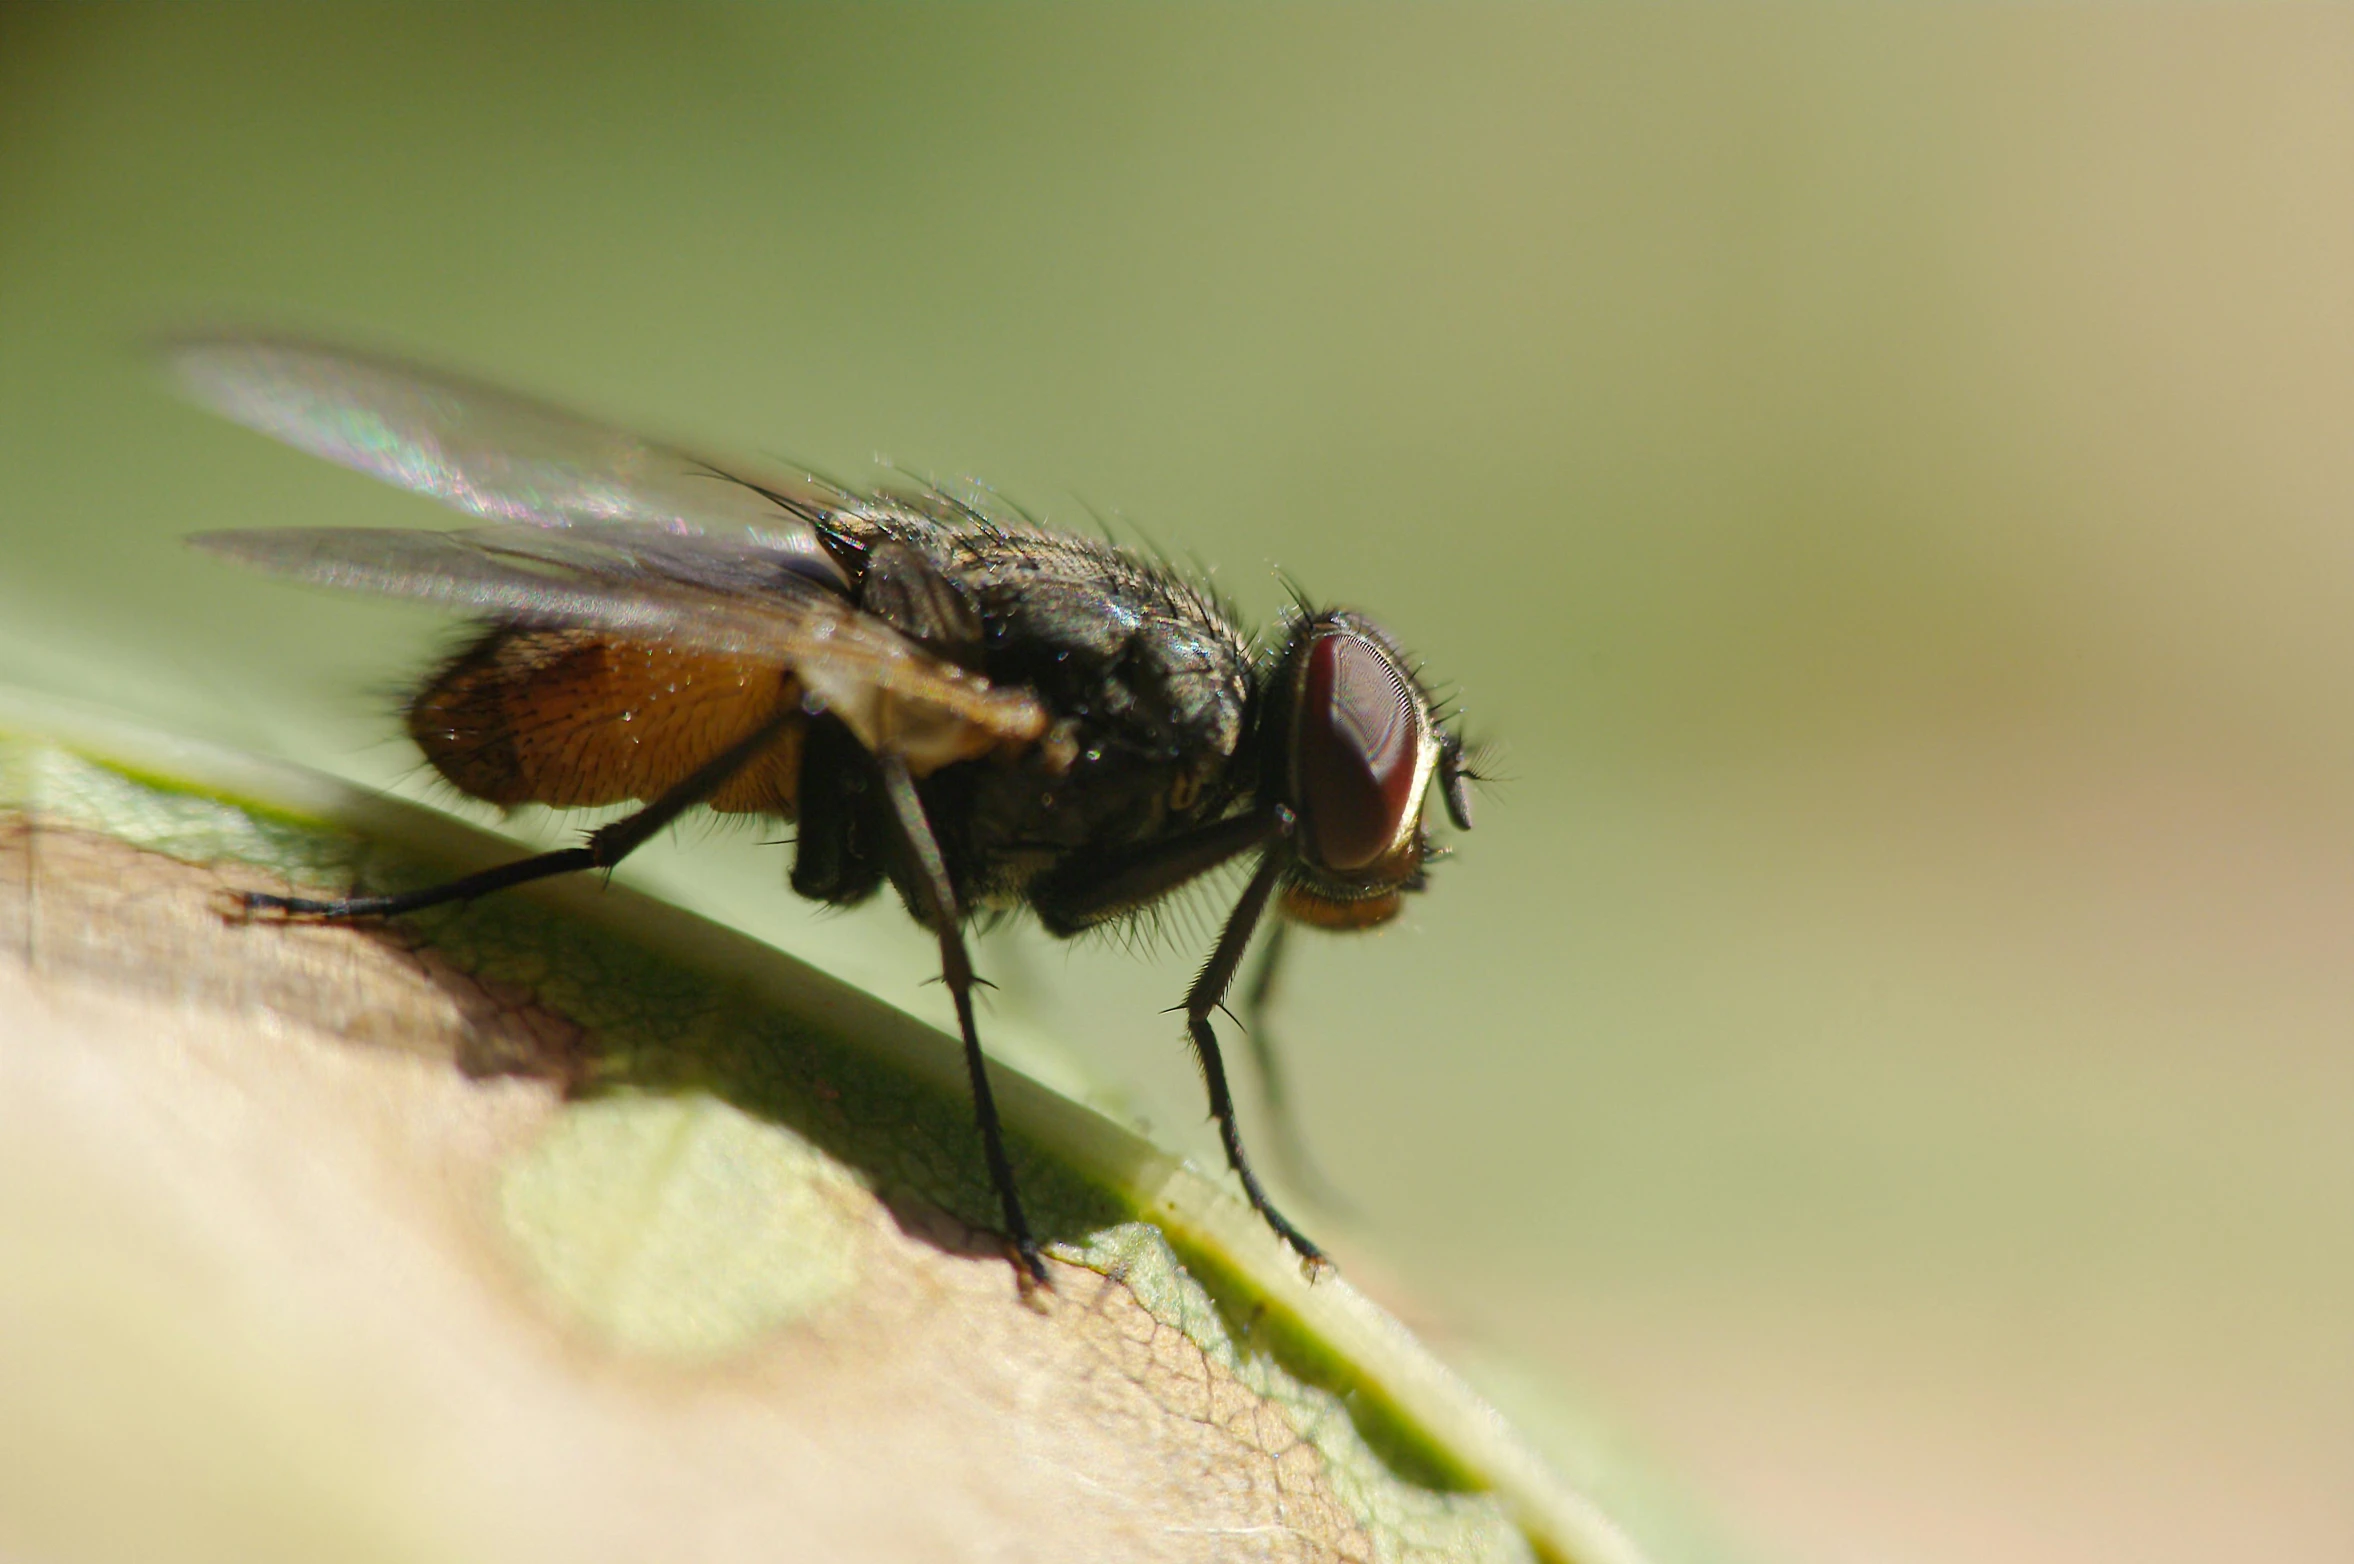 this is a close up view of a fly